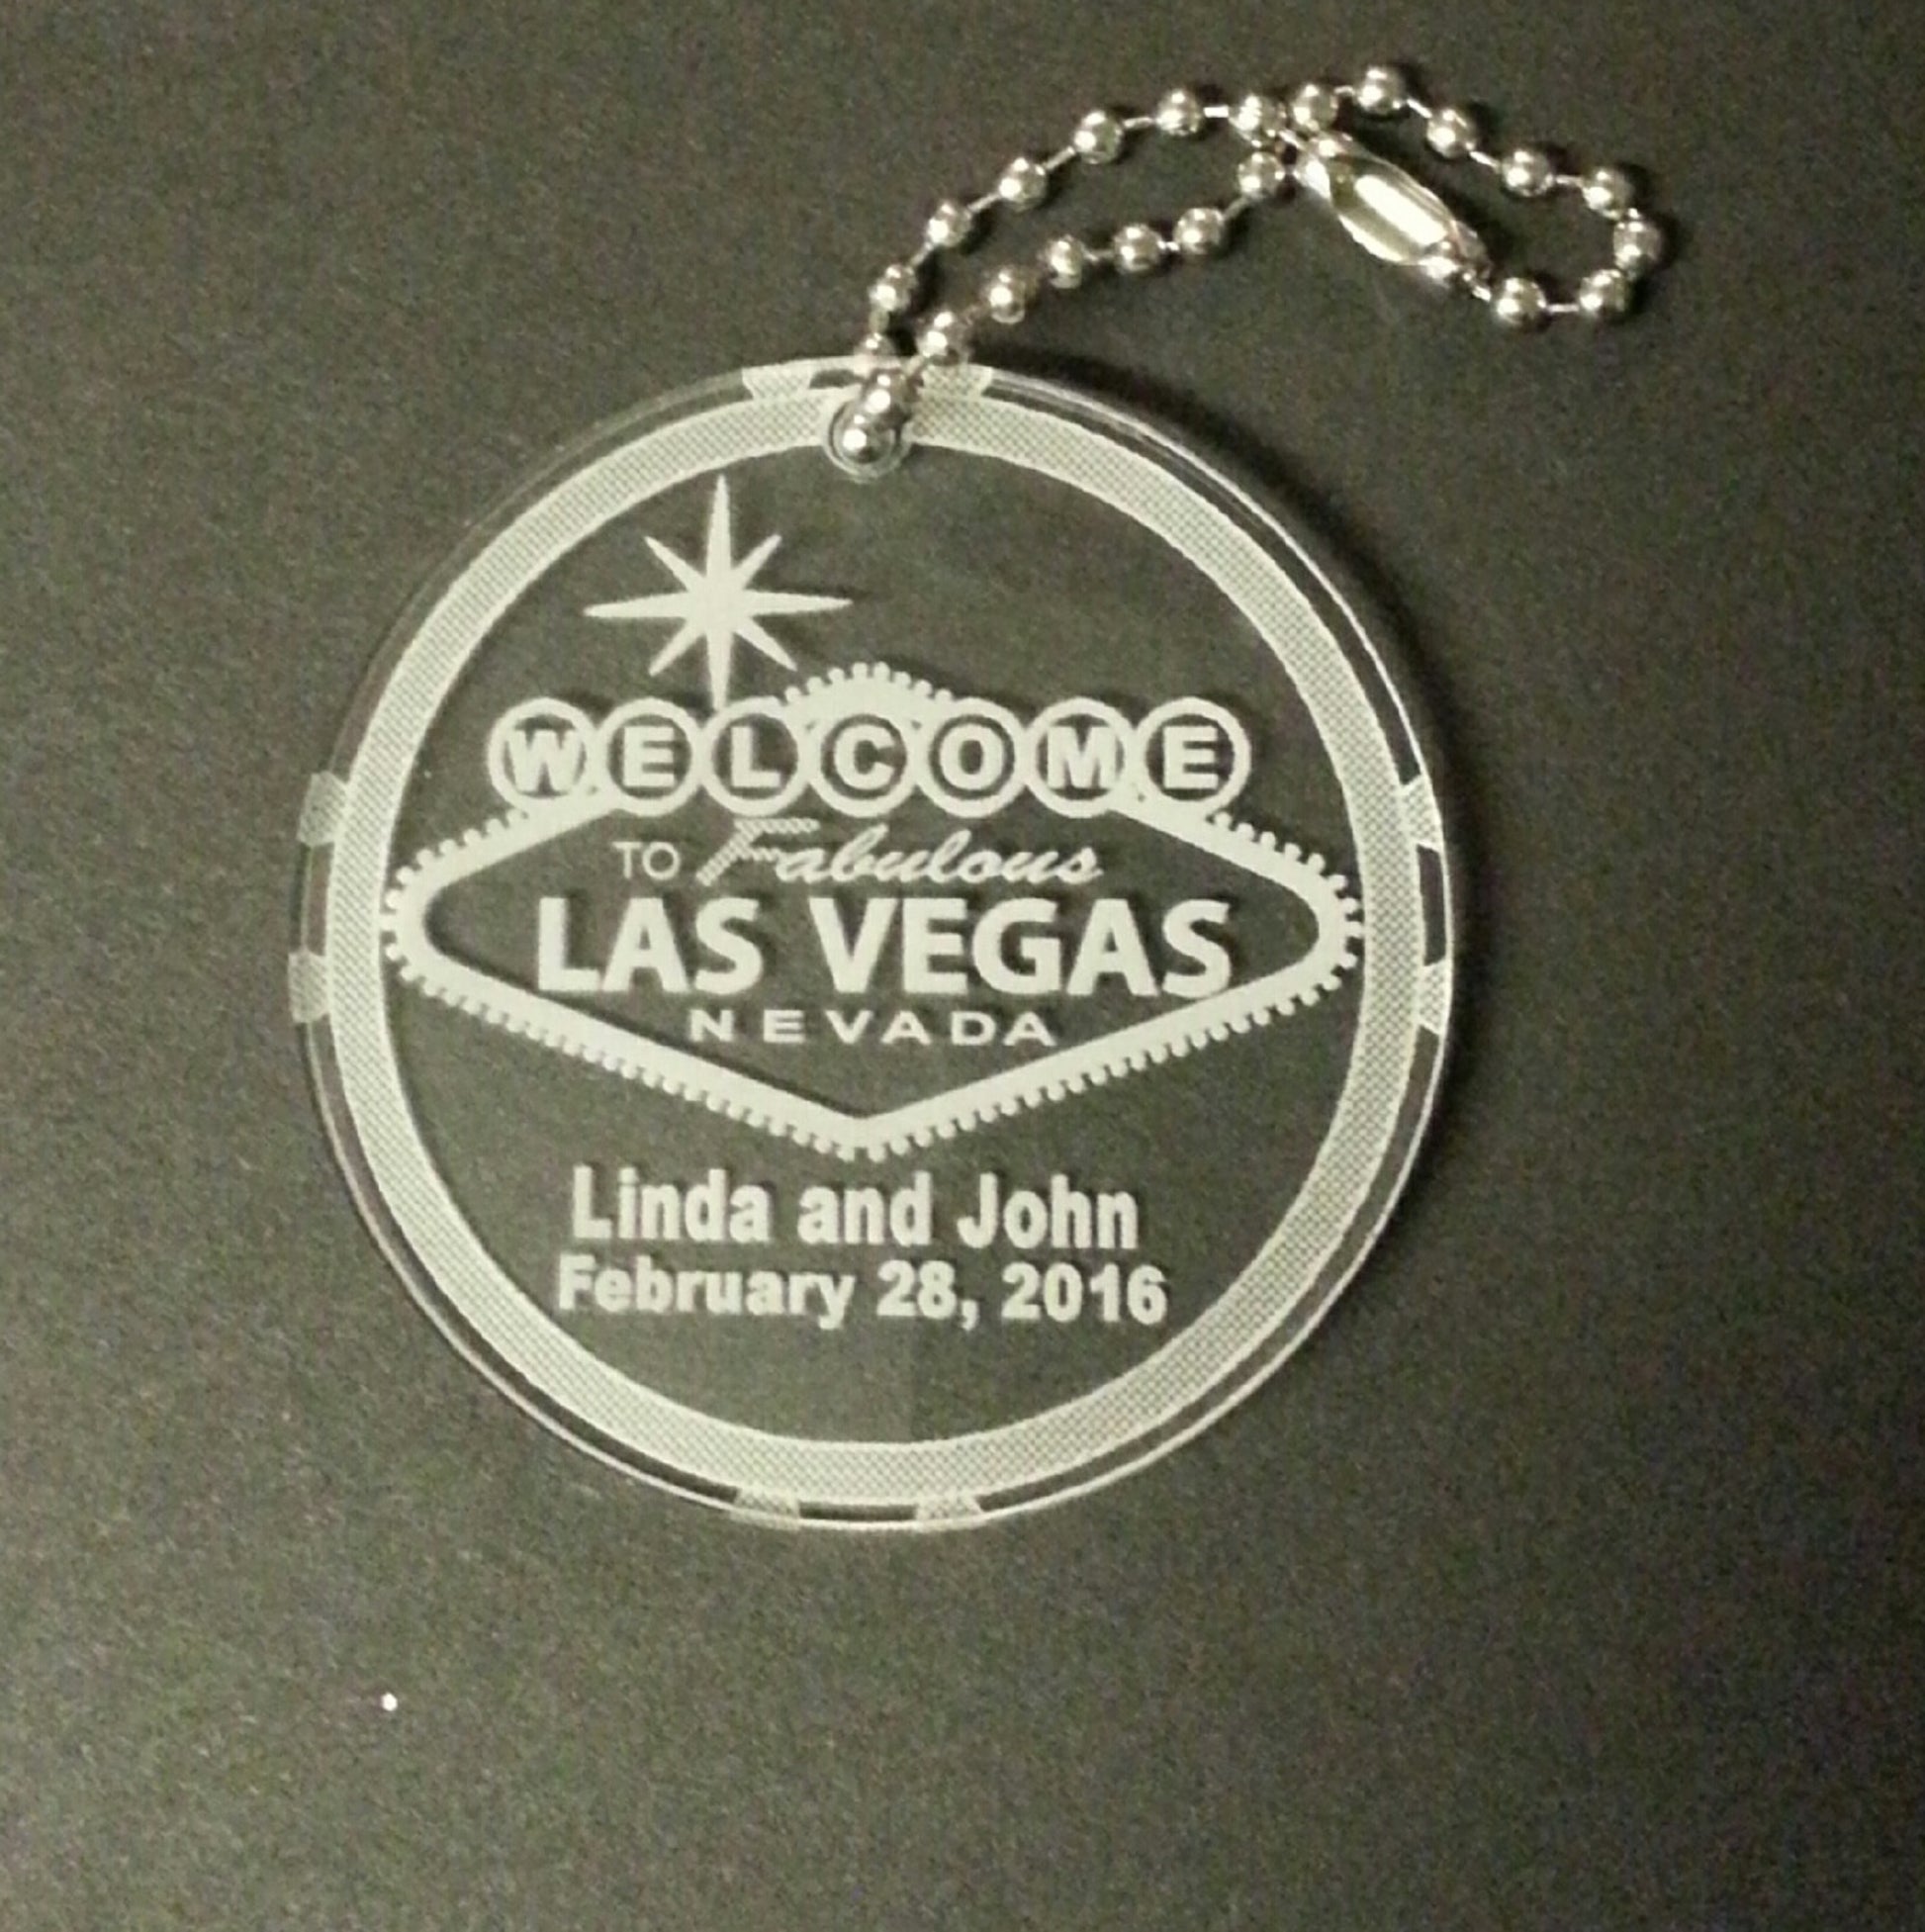 FinesseLaserDesigns Qty 25 Personalized Married or Welcome to Las Vegas Wedding Acrylic Key Chain Favors Poker Chip